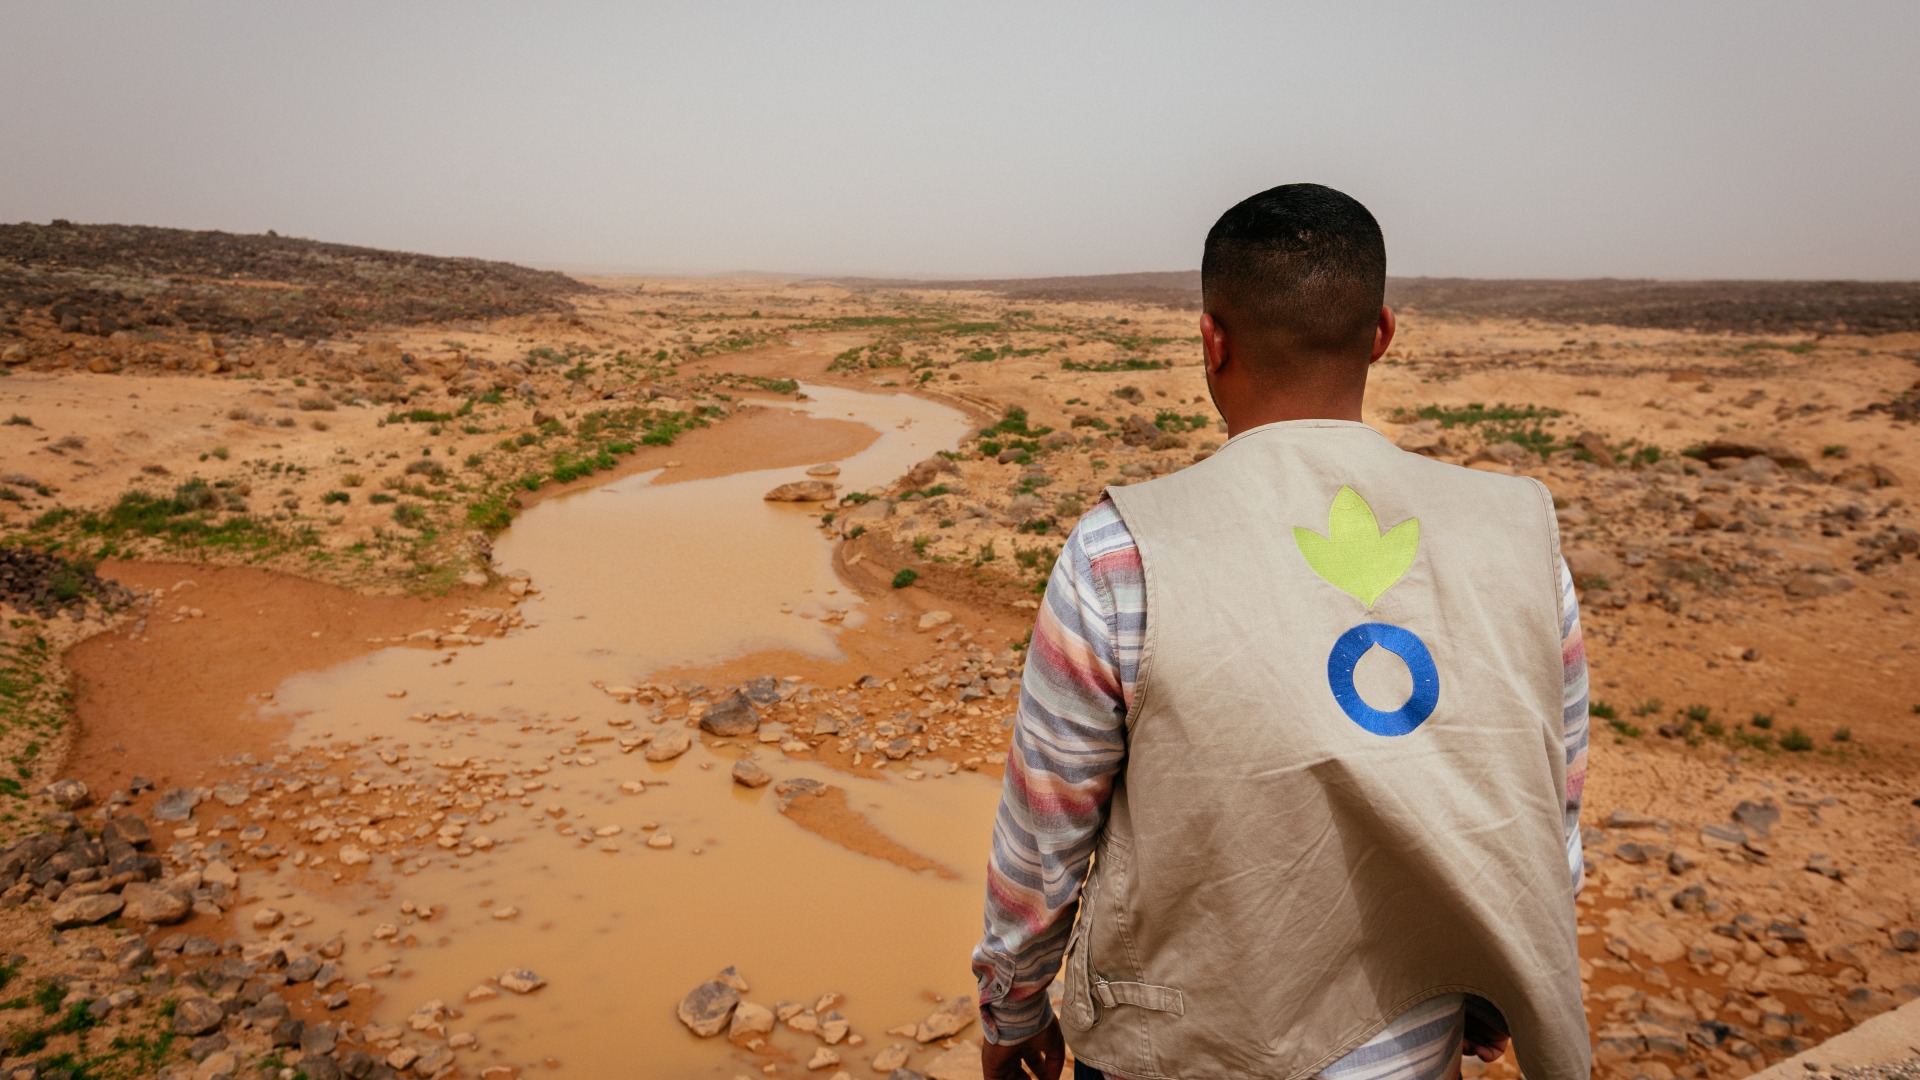 Wasfi Al Sarhan, Action Against Hunger project manager, looks out over an arid landscape in Jordan.